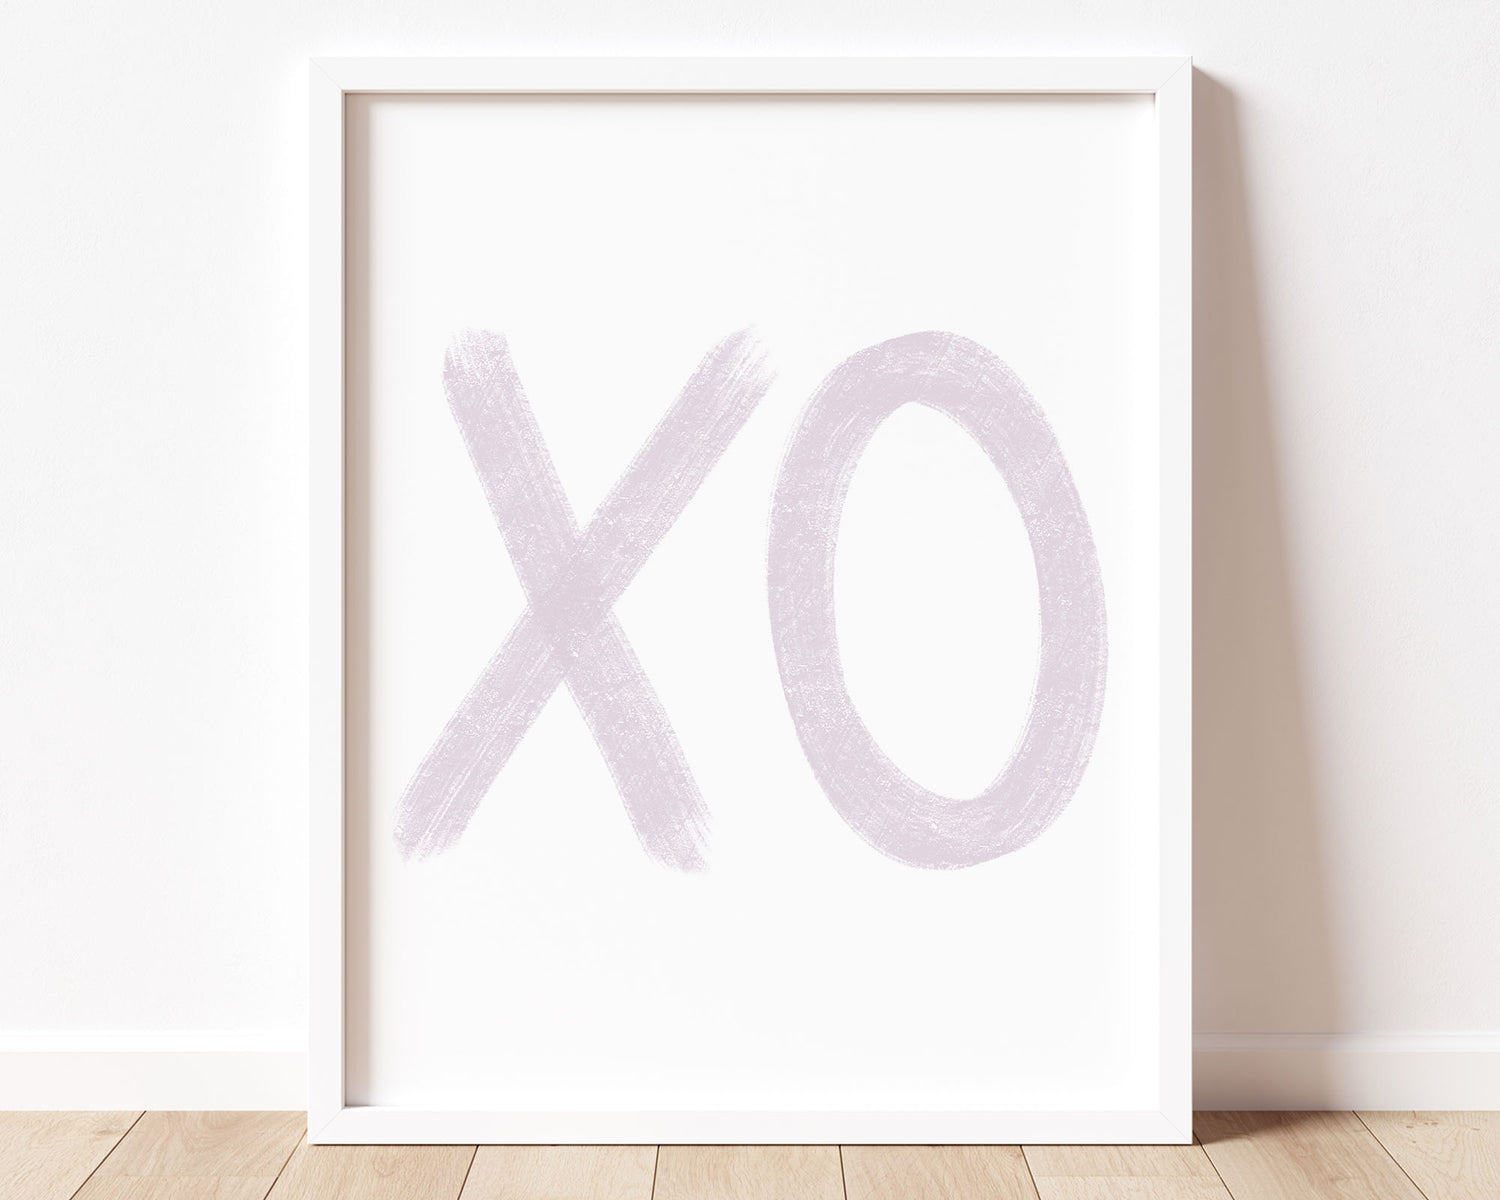 Soft pastel purple, lavender, lilac XO in chalky brushstroke illlustration style perfect for Baby Nursery Décor, Little Boys Bedroom Wall Art, Toddler Girls Room Wall Hangings, Kiddos Bathroom Wall Art and Childrens Playroom Décor.